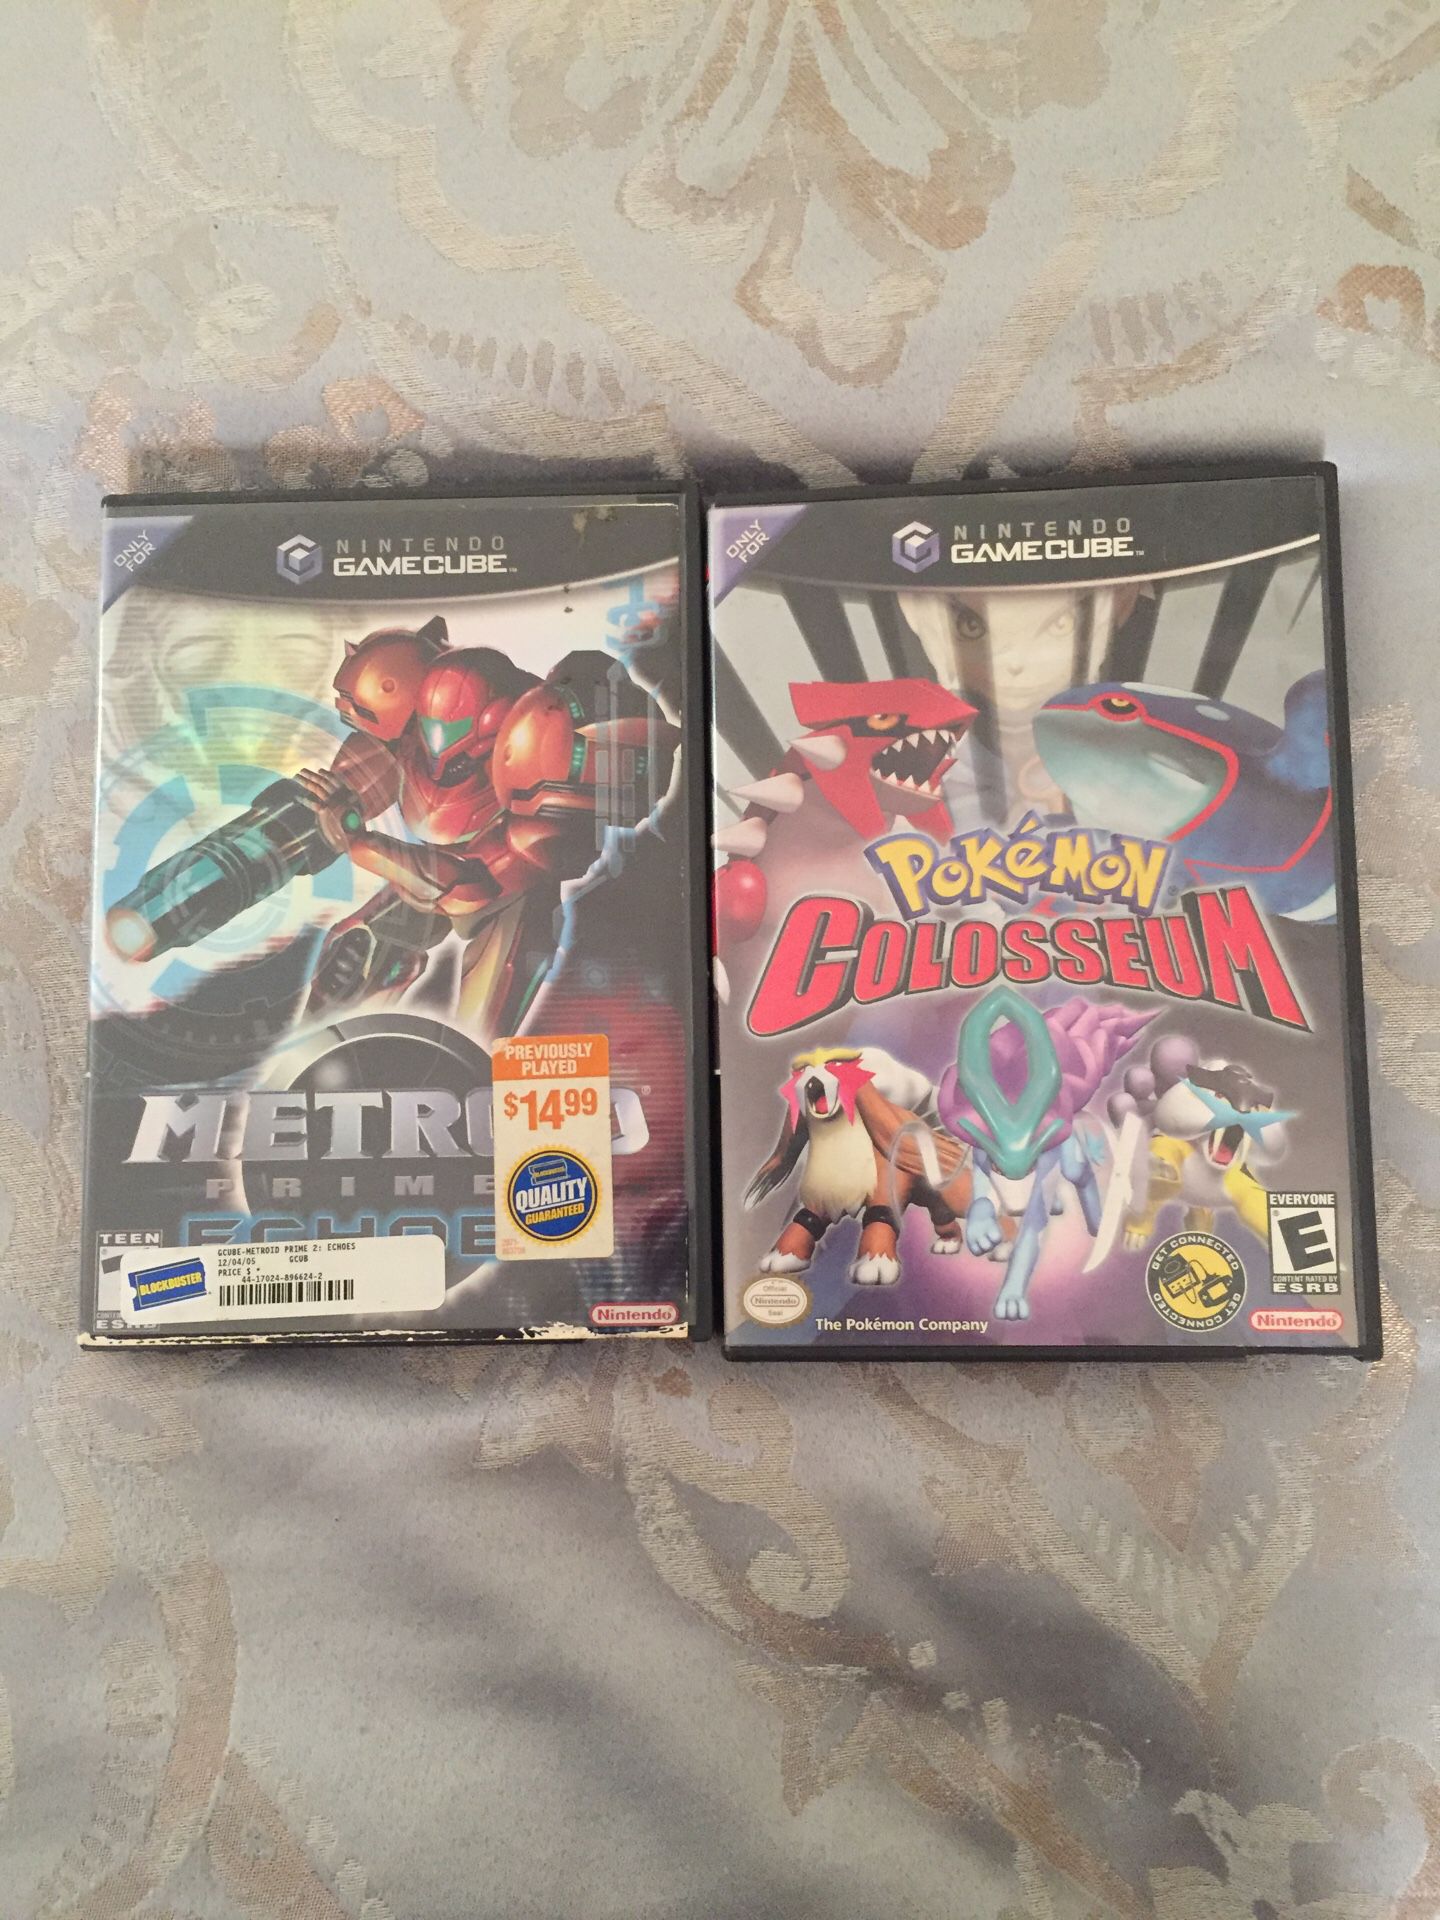 Pokemon colosseum and Metroid prime: echoes GameCube games